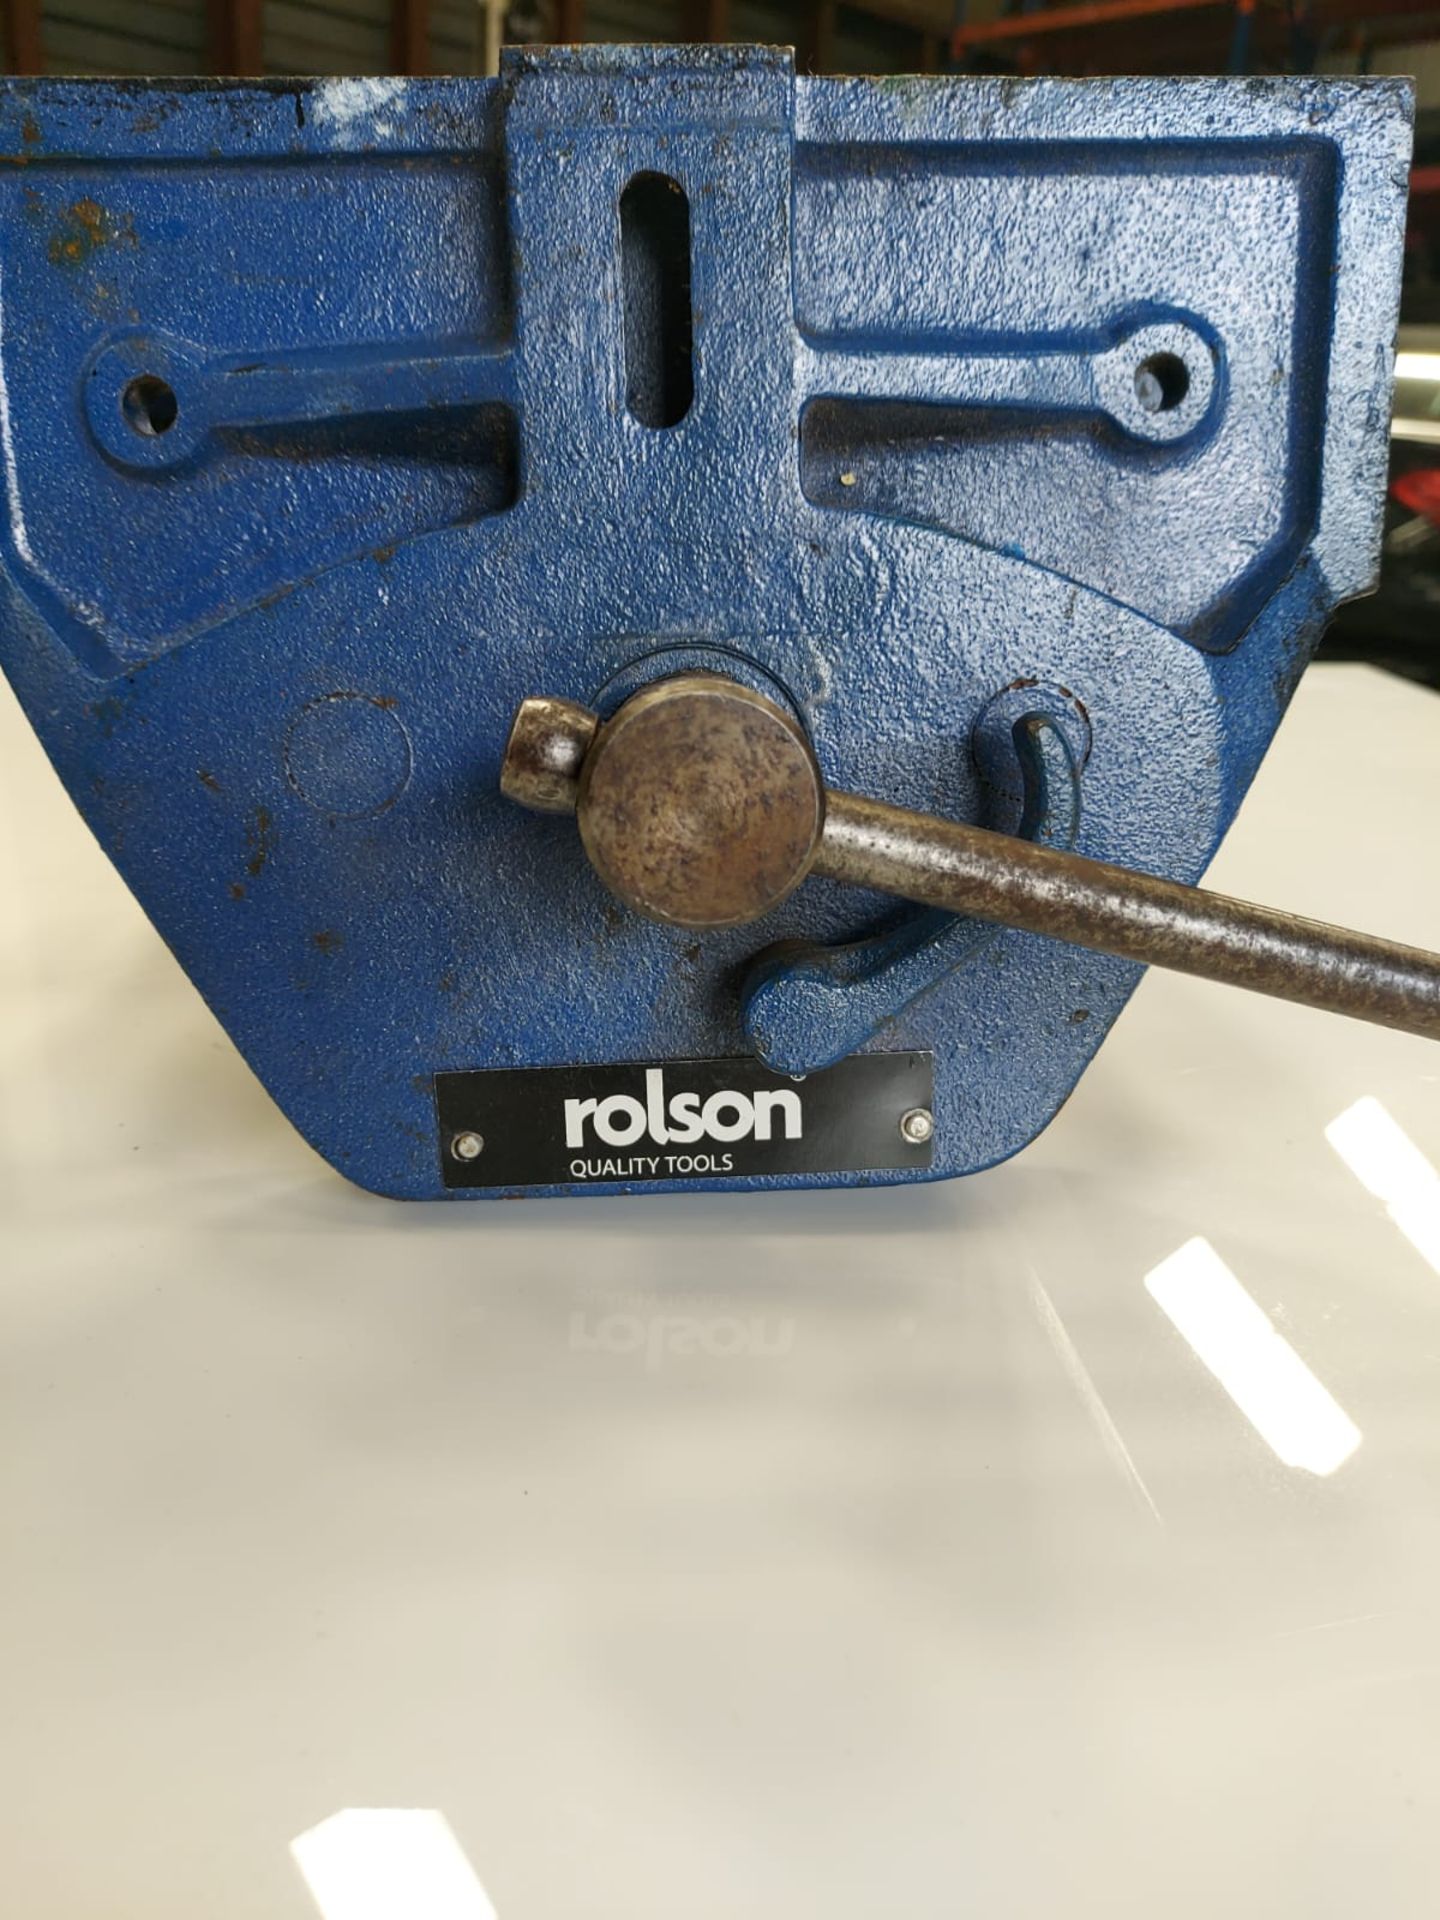 Rolson Wood Working Vice *NO VAT* - Image 7 of 7